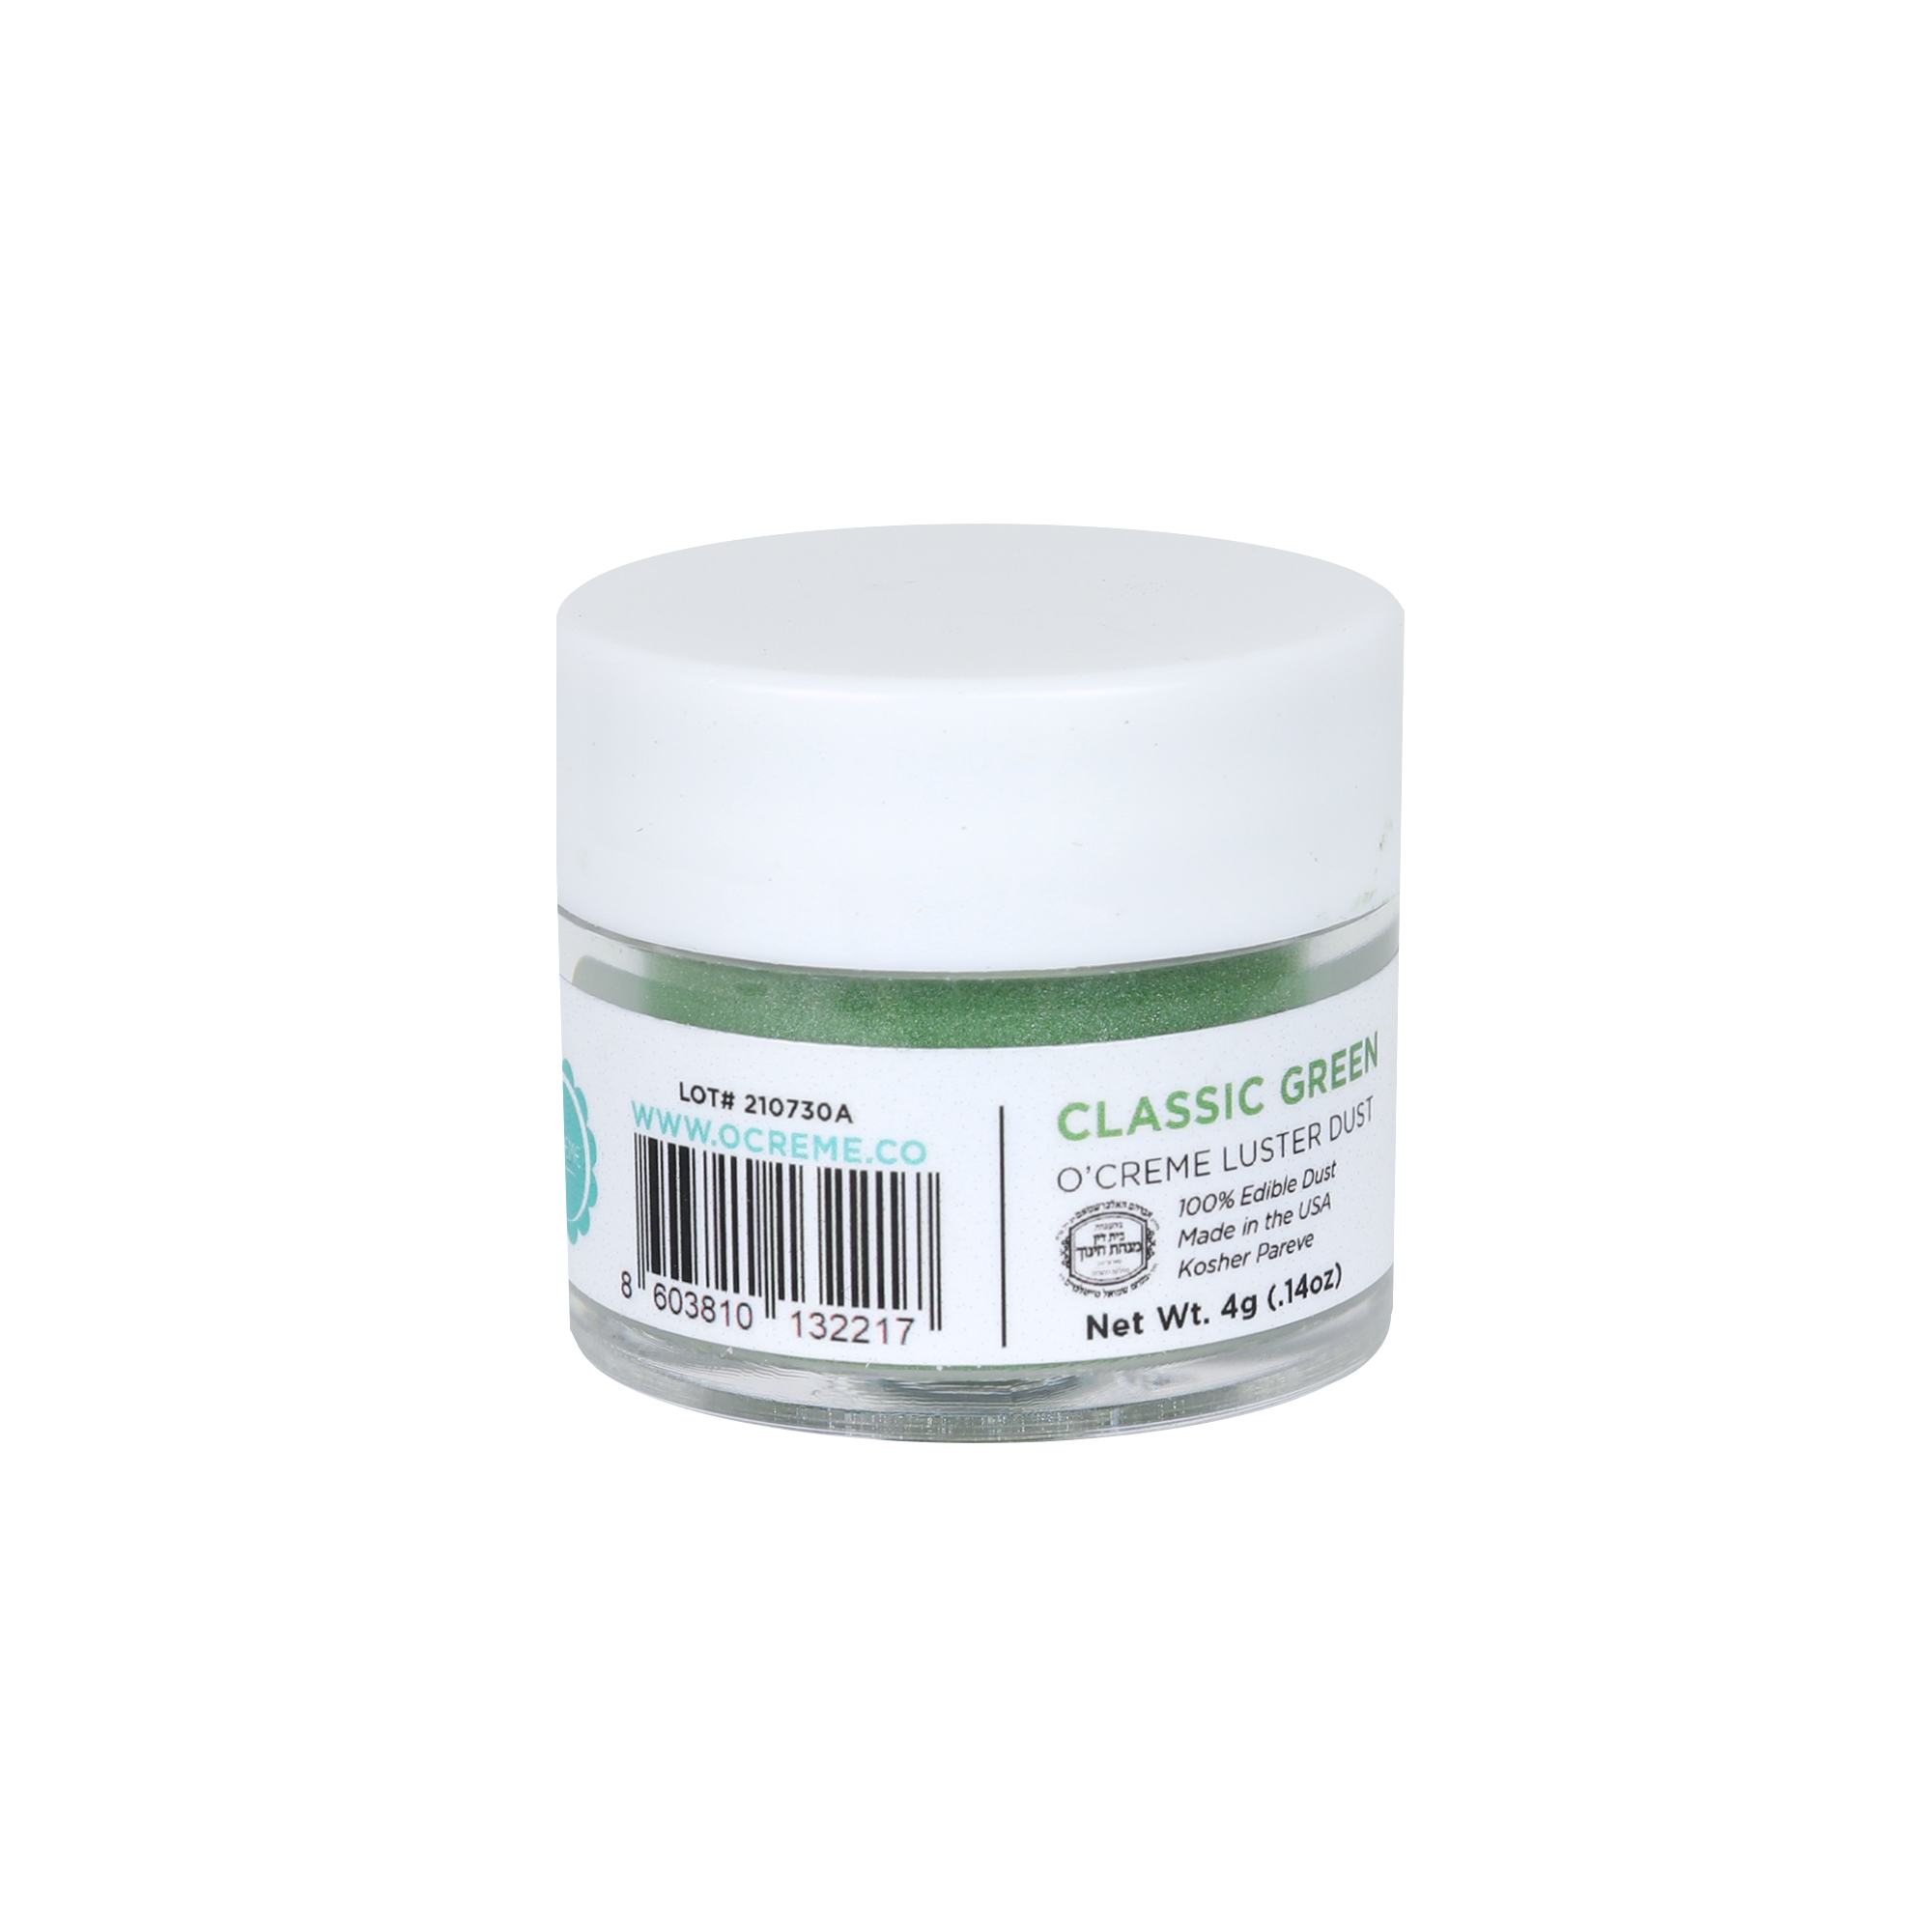 O'Creme Classic Green Luster Dust, 4 gr. image 1